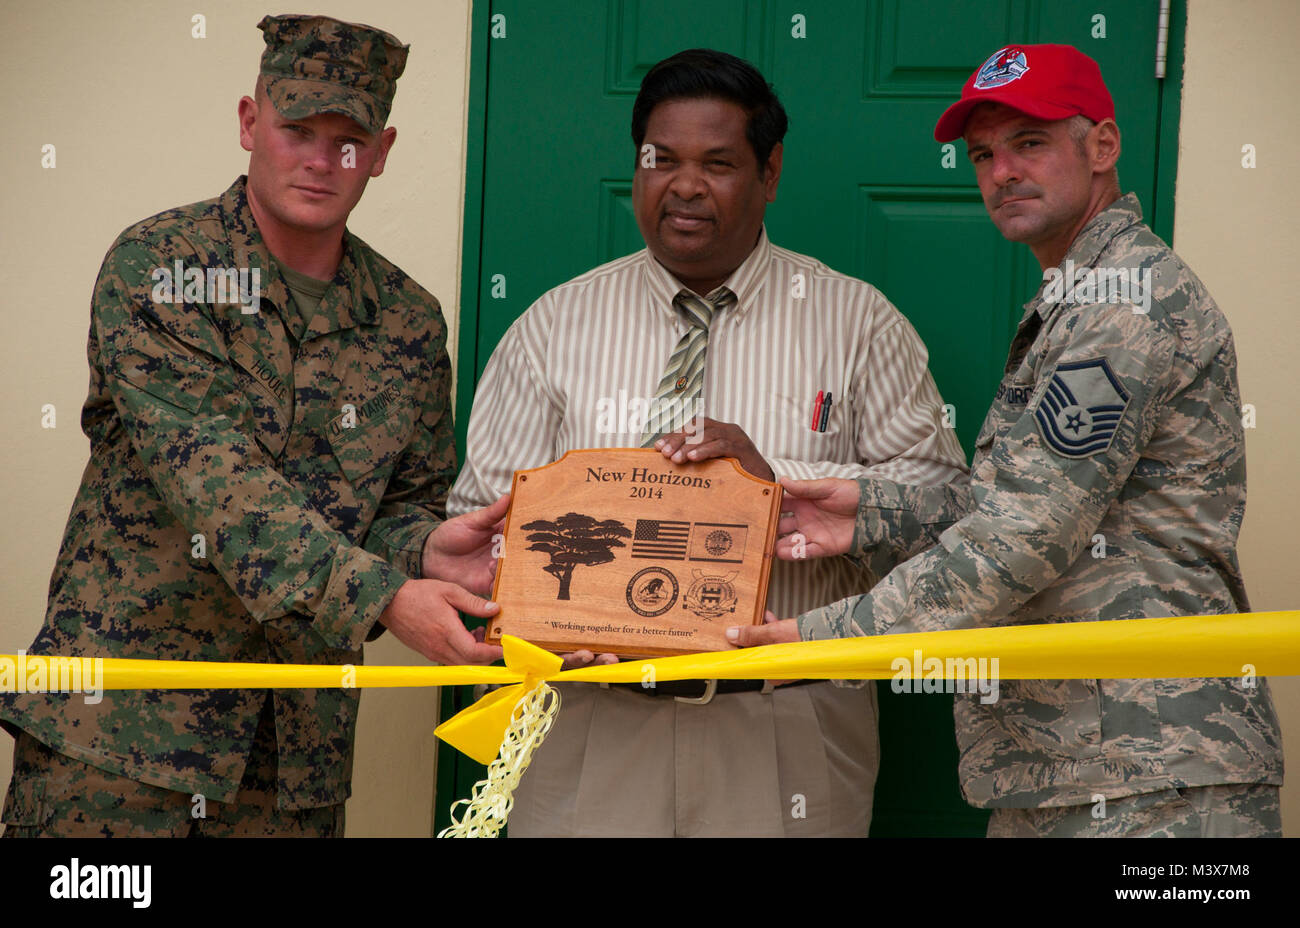 U.S. Marine Corps Staff Sgt. Matt Houle, construction site foreman, left, and U.S. Air Force Master Sgt. Nicholas Alessi, construction site project manager, right, present a plaque to Rodrick Cardinez, Edward P. Yorke school principal, during the ribbon cutting ceremony June 4, 2014, at the school in Belize City, Belize. The school's 1,372 square foot, two-classroom addition is one of five New Horizons projects in the country. New Horizons is an annual multinational exercise that provides training opportunities in civil engineering and medical care. (U.S. Air Force photo by Tech. Sgt. Kali L.  Stock Photo